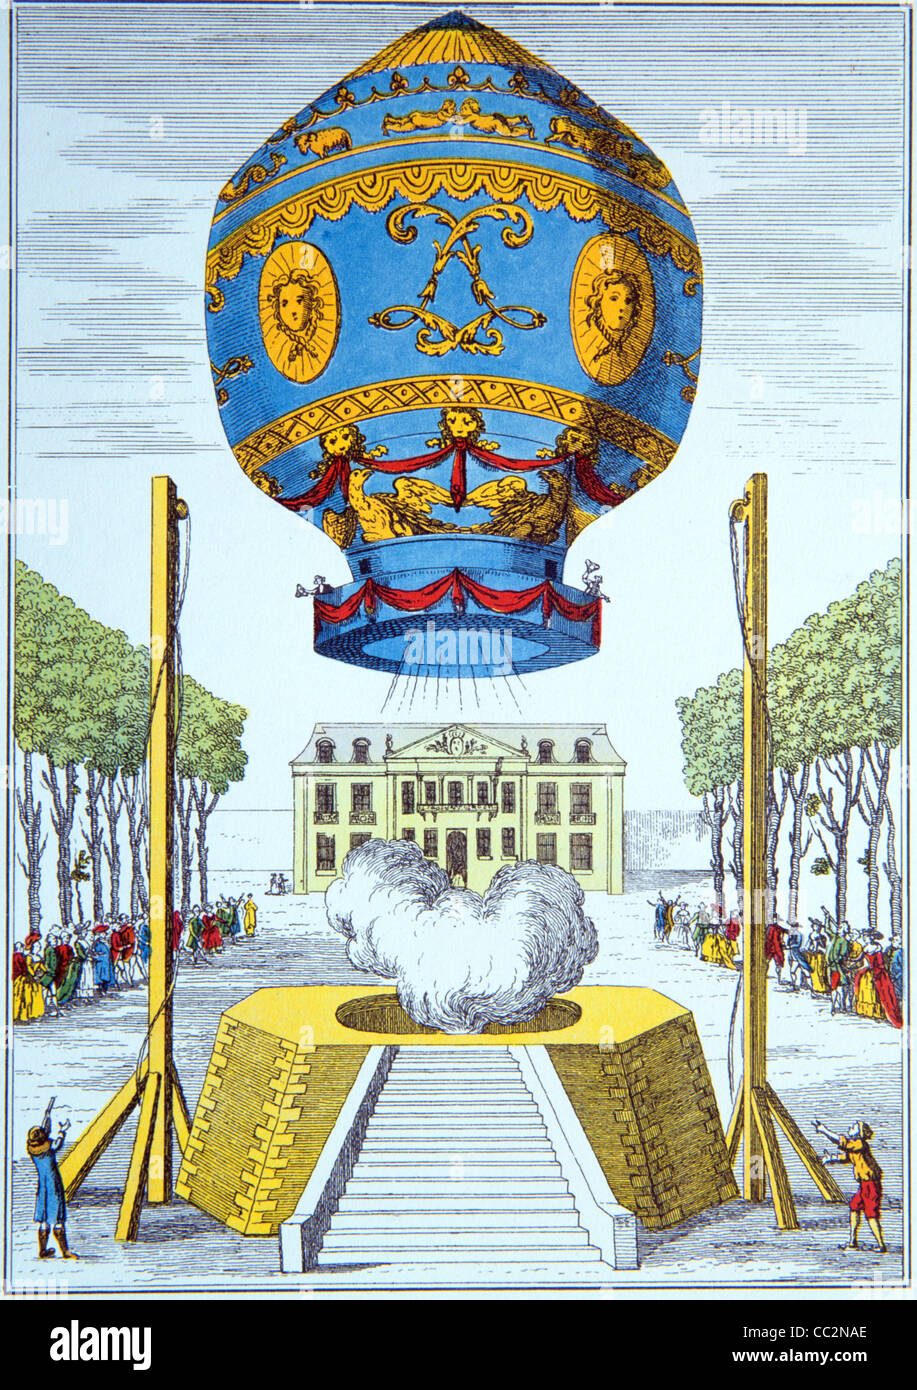 Montgolfier Brothers Hot Air Balloon. Maiden or World's First Flight of a Hot Air Balloon, Paris, November 1783. c19th Engraving or Illustration Stock Photo